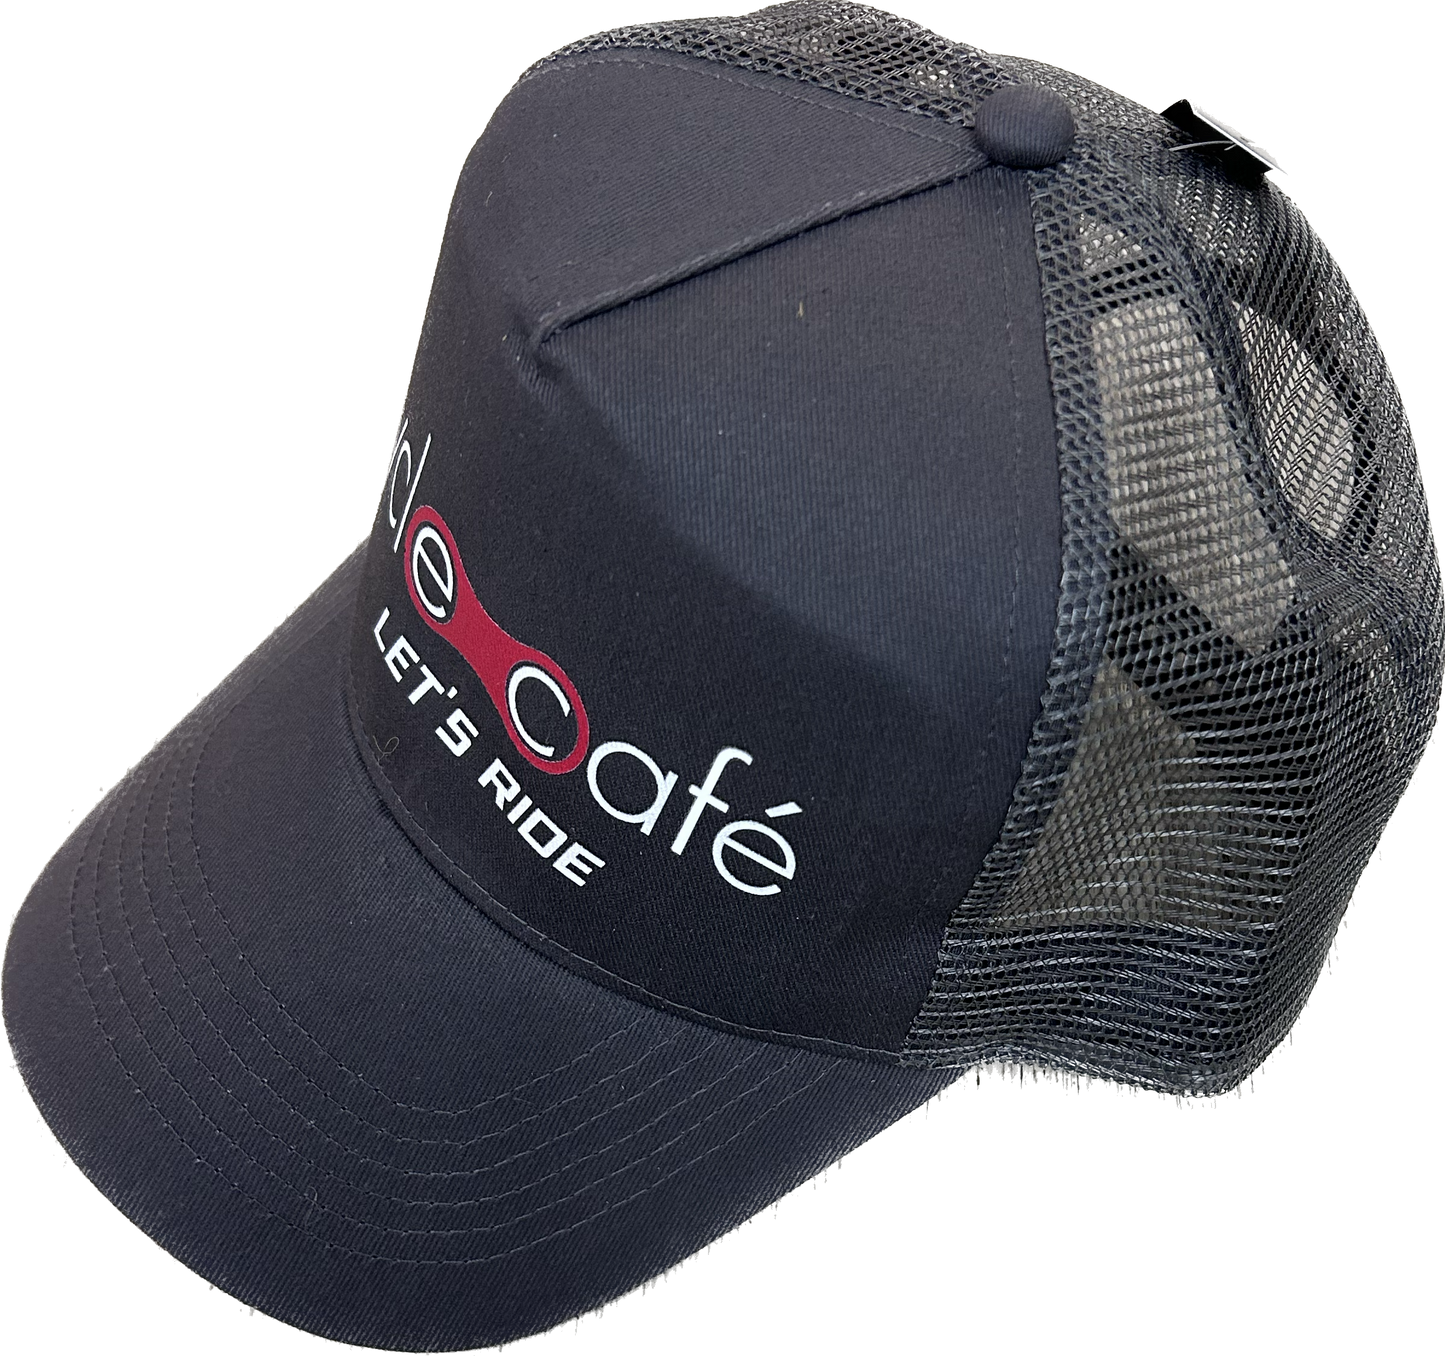 Cappellino Cycle Café tg. unica - RIDE BIKE BE HAPPY - LET’S RIDE